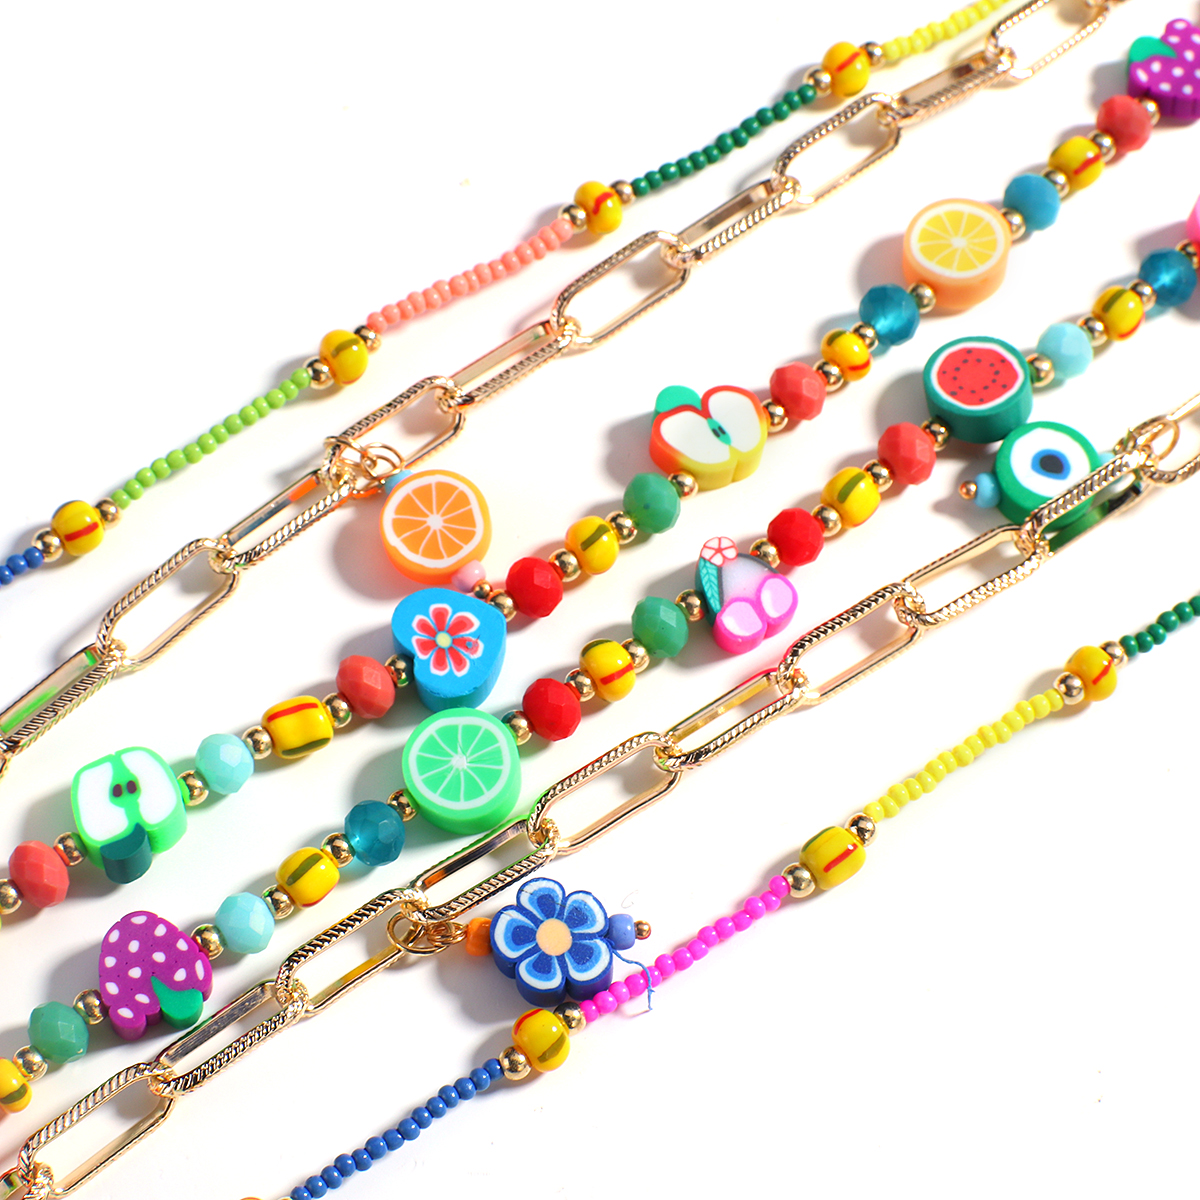 AENSOA 3 Layers Bohemia Fruit Polymer Clay Necklaces For Women Girls Colorful Beads Alloy Choker Collares Necklace Jewelry Gifts 6